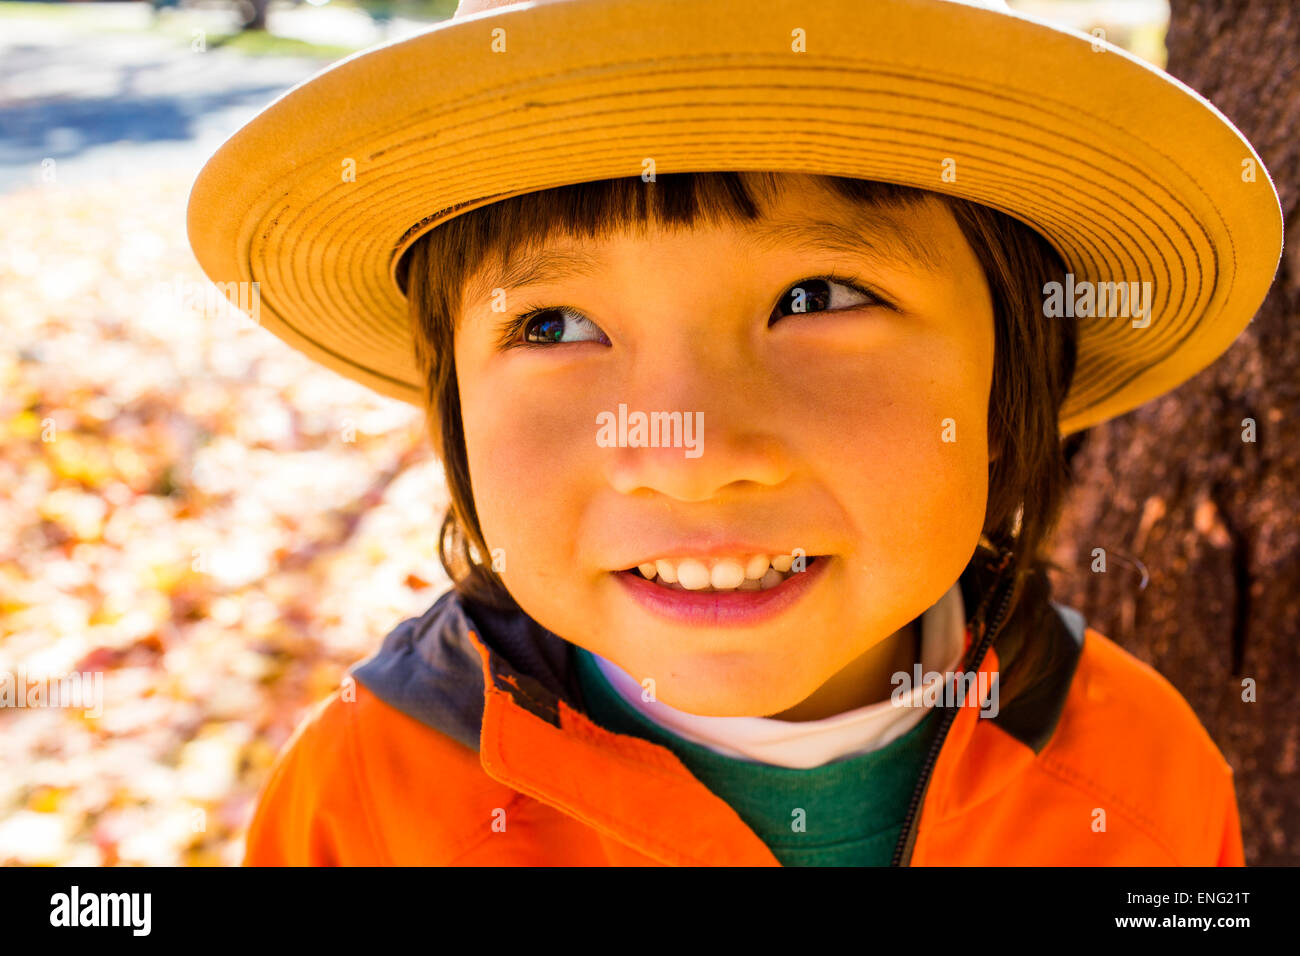 Close up of smiling mixed race boy wearing sun hat Stock Photo